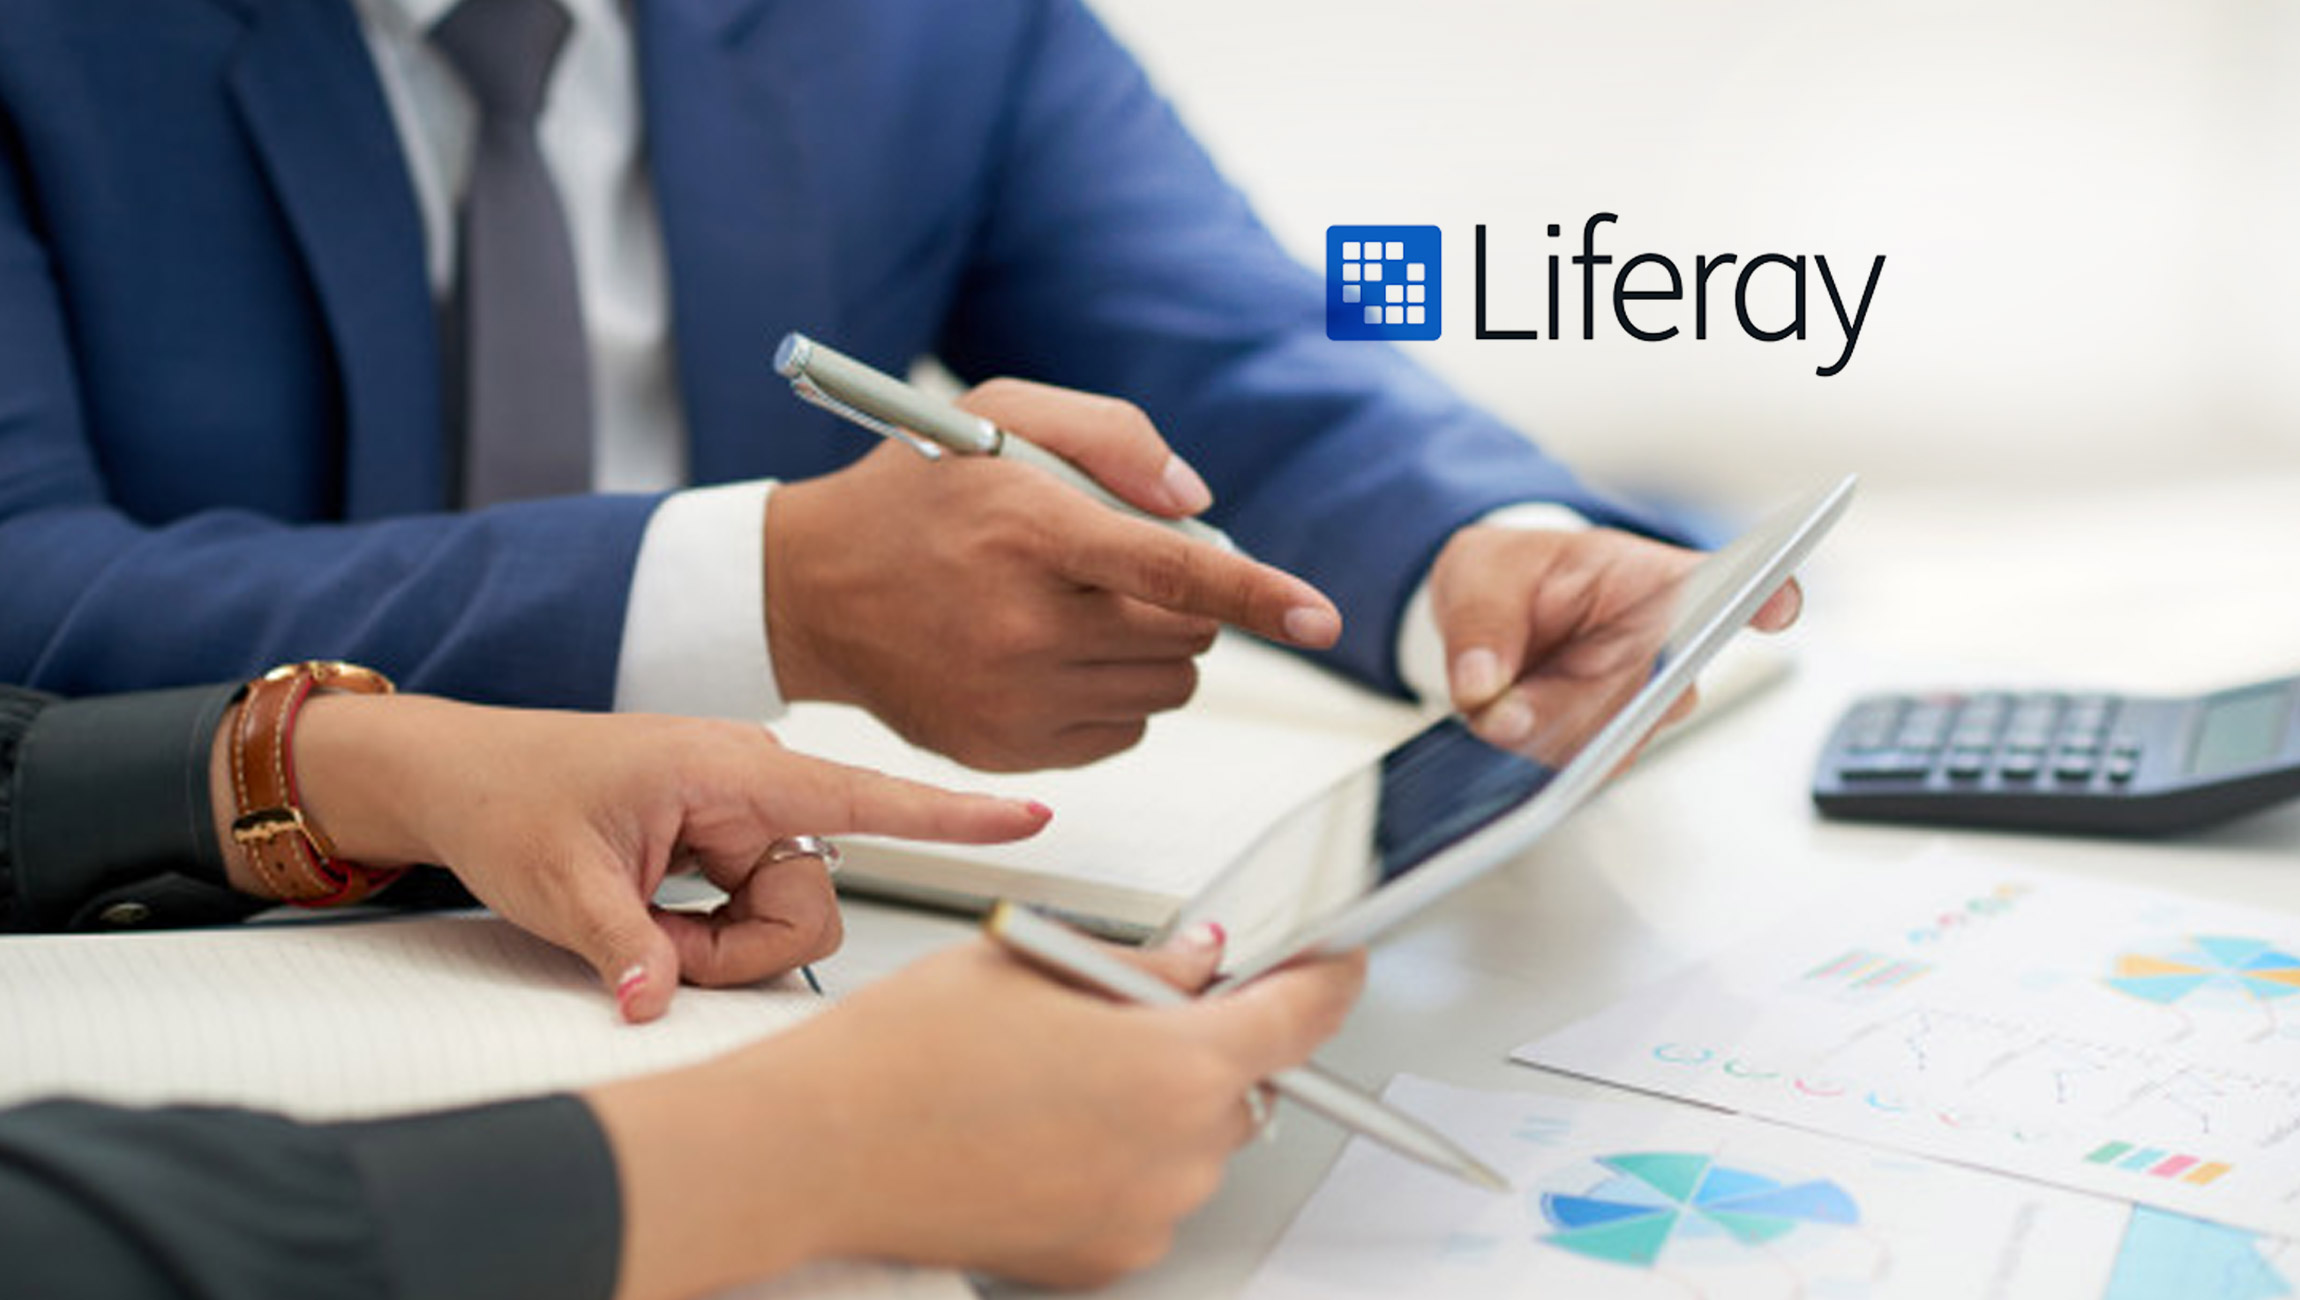 Liferay A Modern Web Development Technology With Great Features